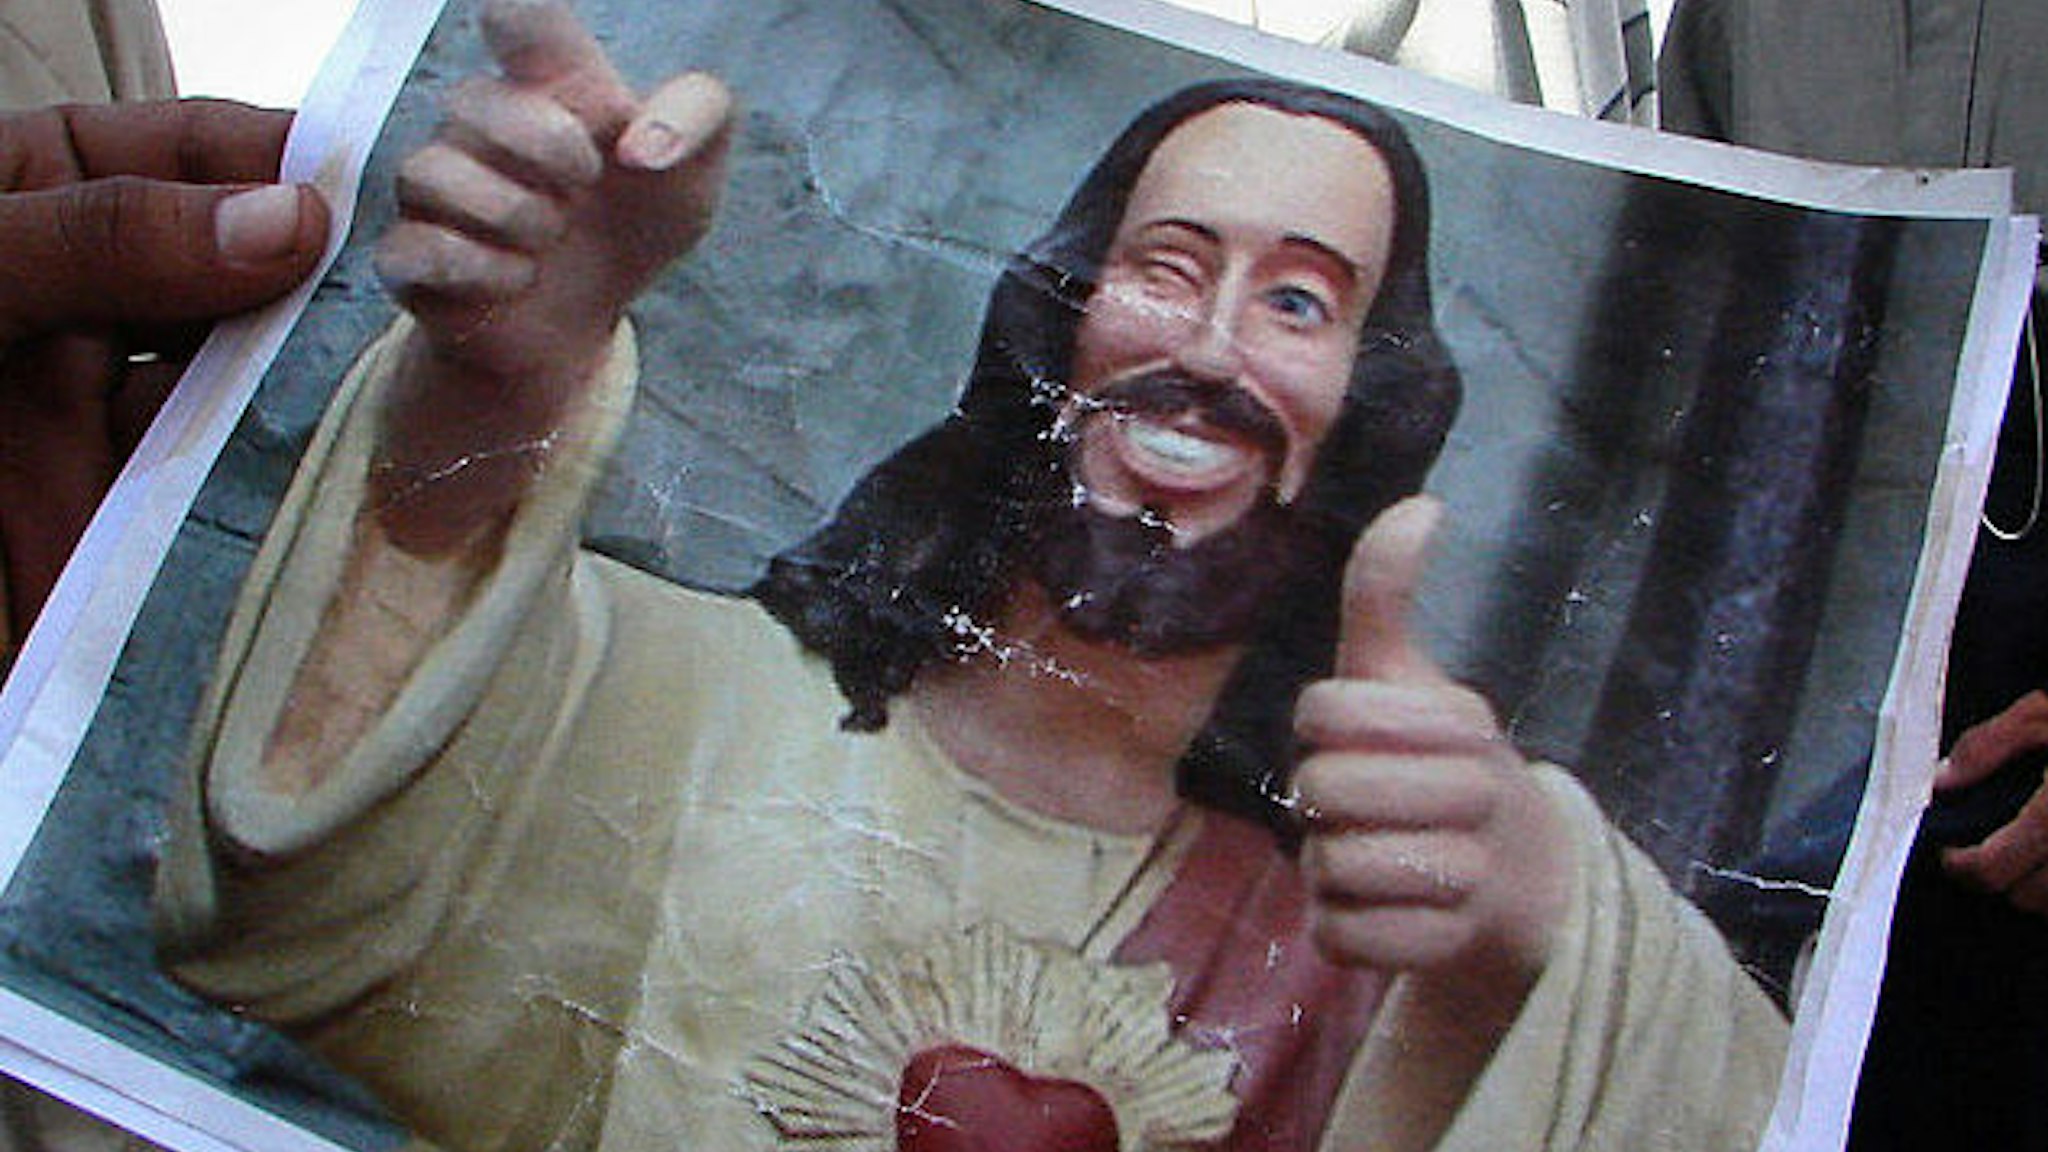 A picture of "Buddy Jesus" from the 1999 film "Dogma." (Photo credit should read WISSAM AL-OKAILI/AFP via Getty Images)